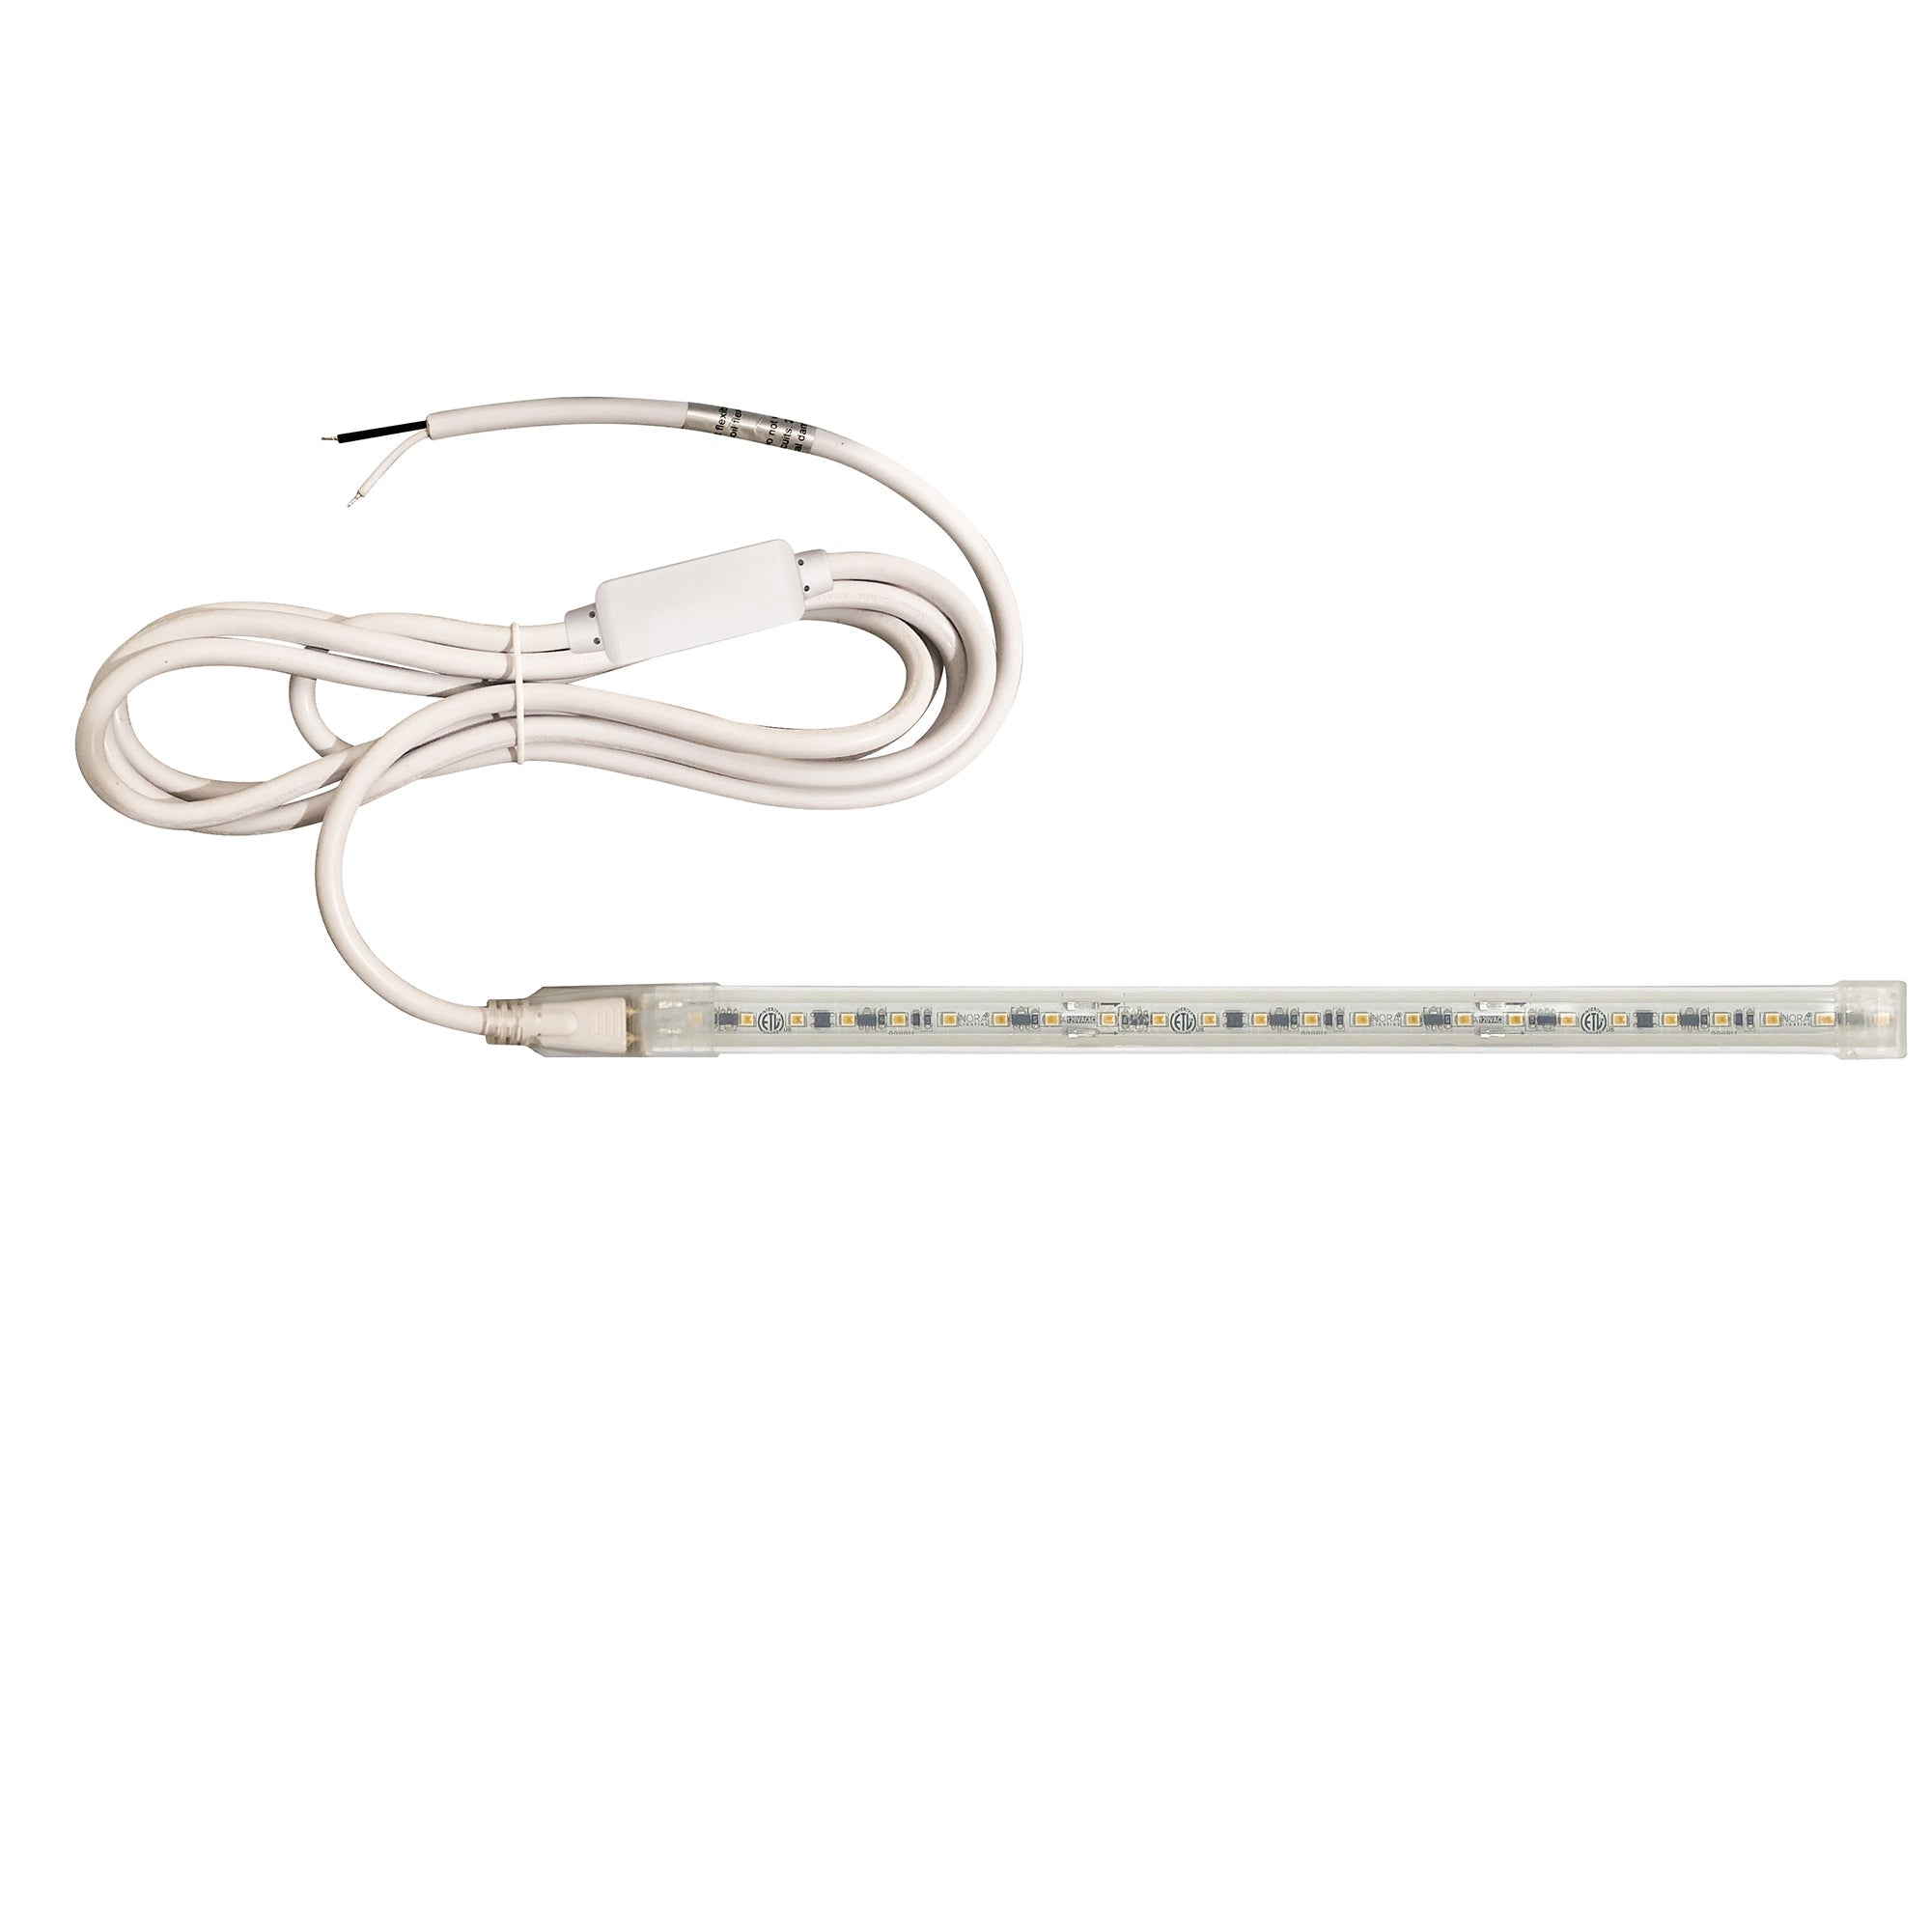 Nora Lighting NUTP13-W46-8-12-930/HWSP - Accent / Undercabinet - Custom Cut 46-ft, 8-in 120V Continuous LED Tape Light, 330lm / 3.6W per foot, 3000K, w/ Mounting Clips and 8' Hardwired Power Cord w/ Surge Protector